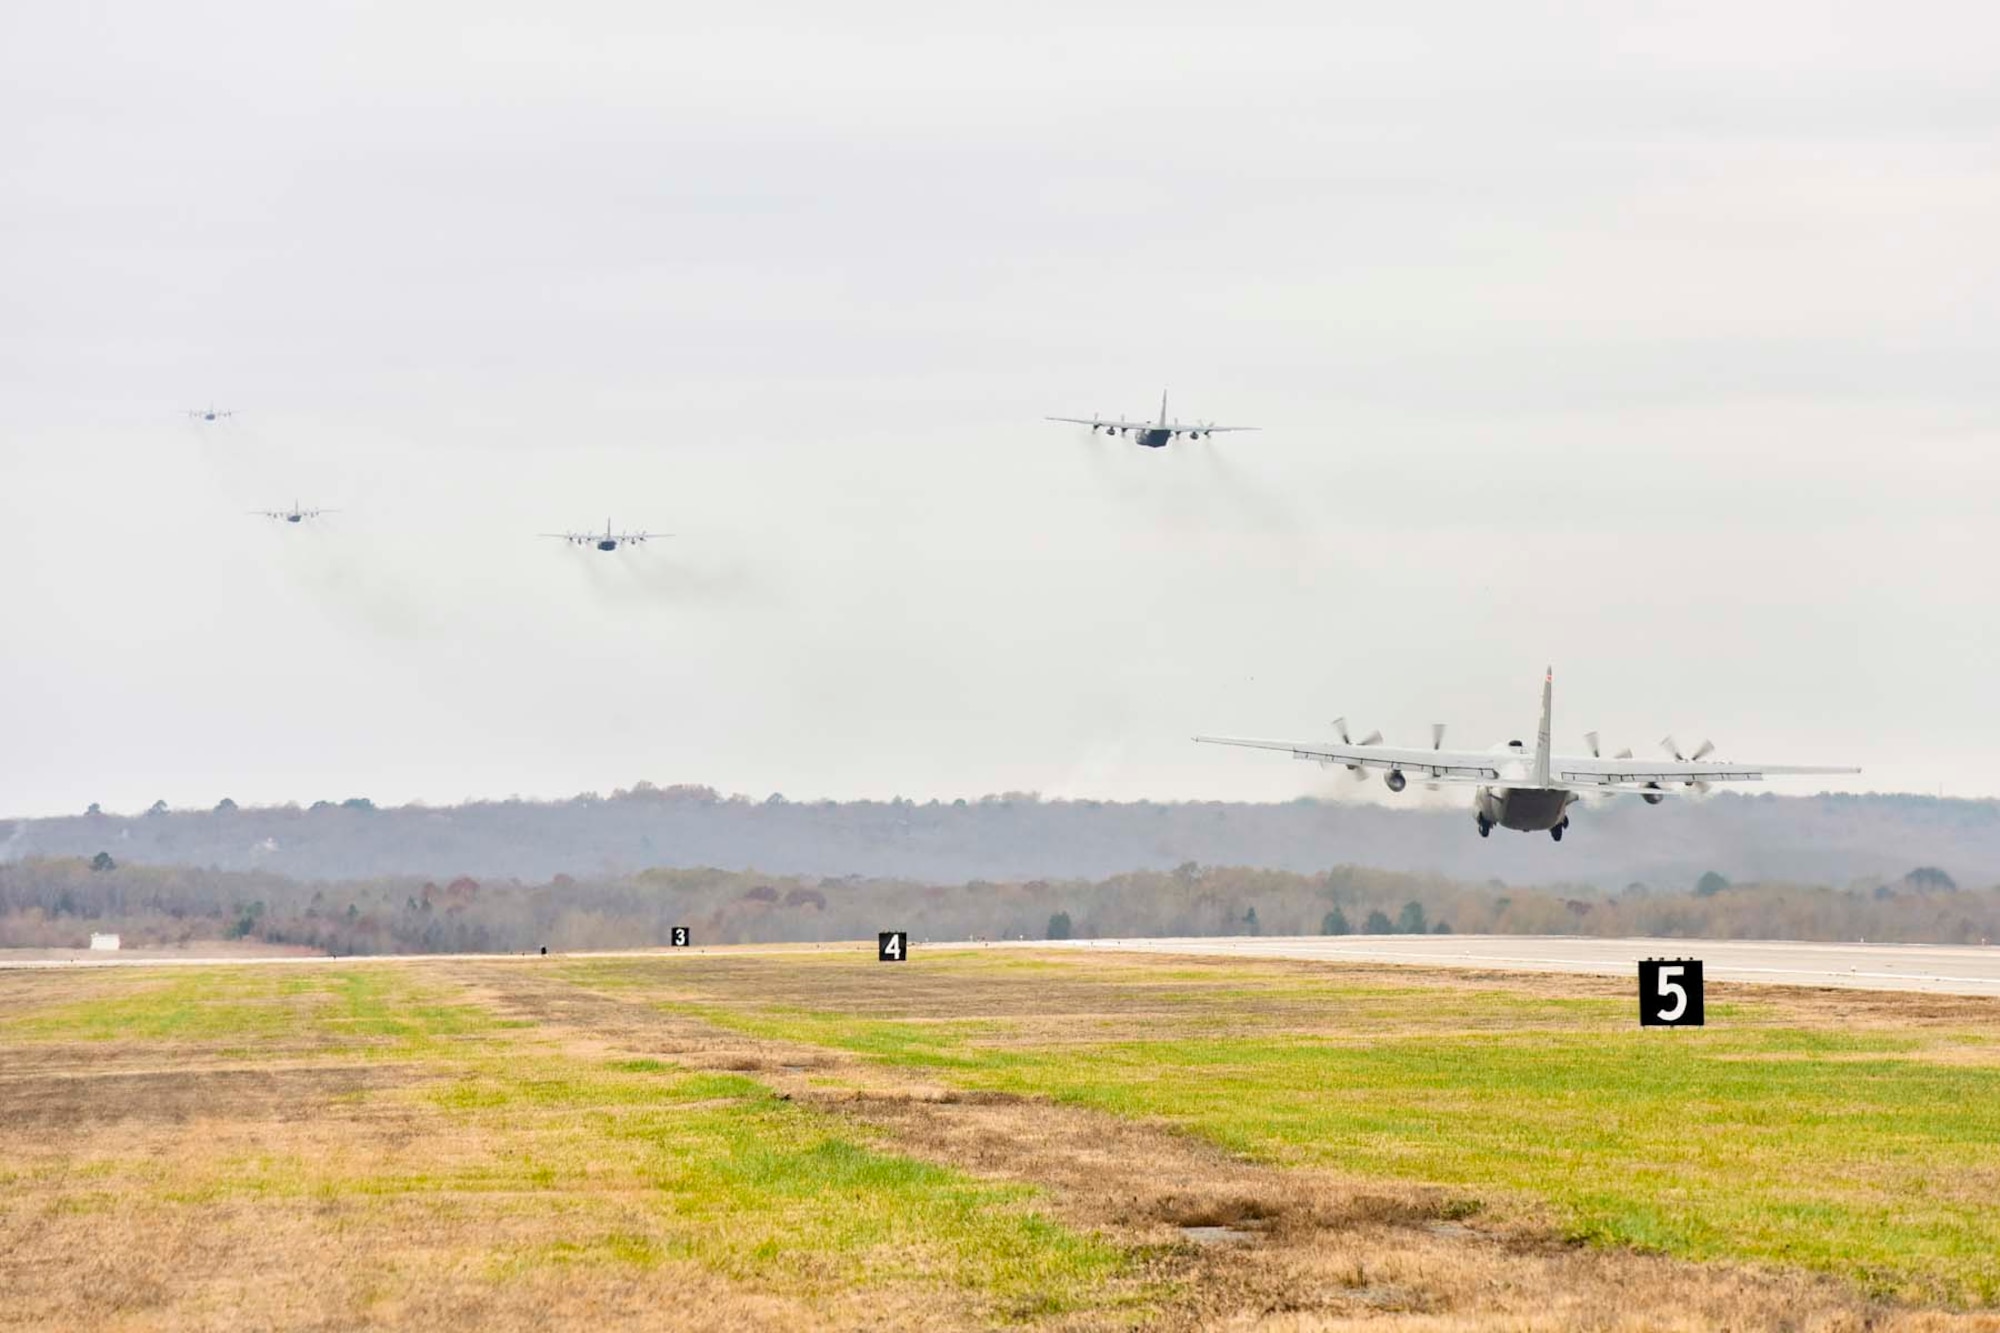 Five C-130J aircraft takeoff during Operation Tenacious Turtle as part of a 14-aircraft formation Nov. 21, 2017, at Little Rock Air Force Base, Ark.